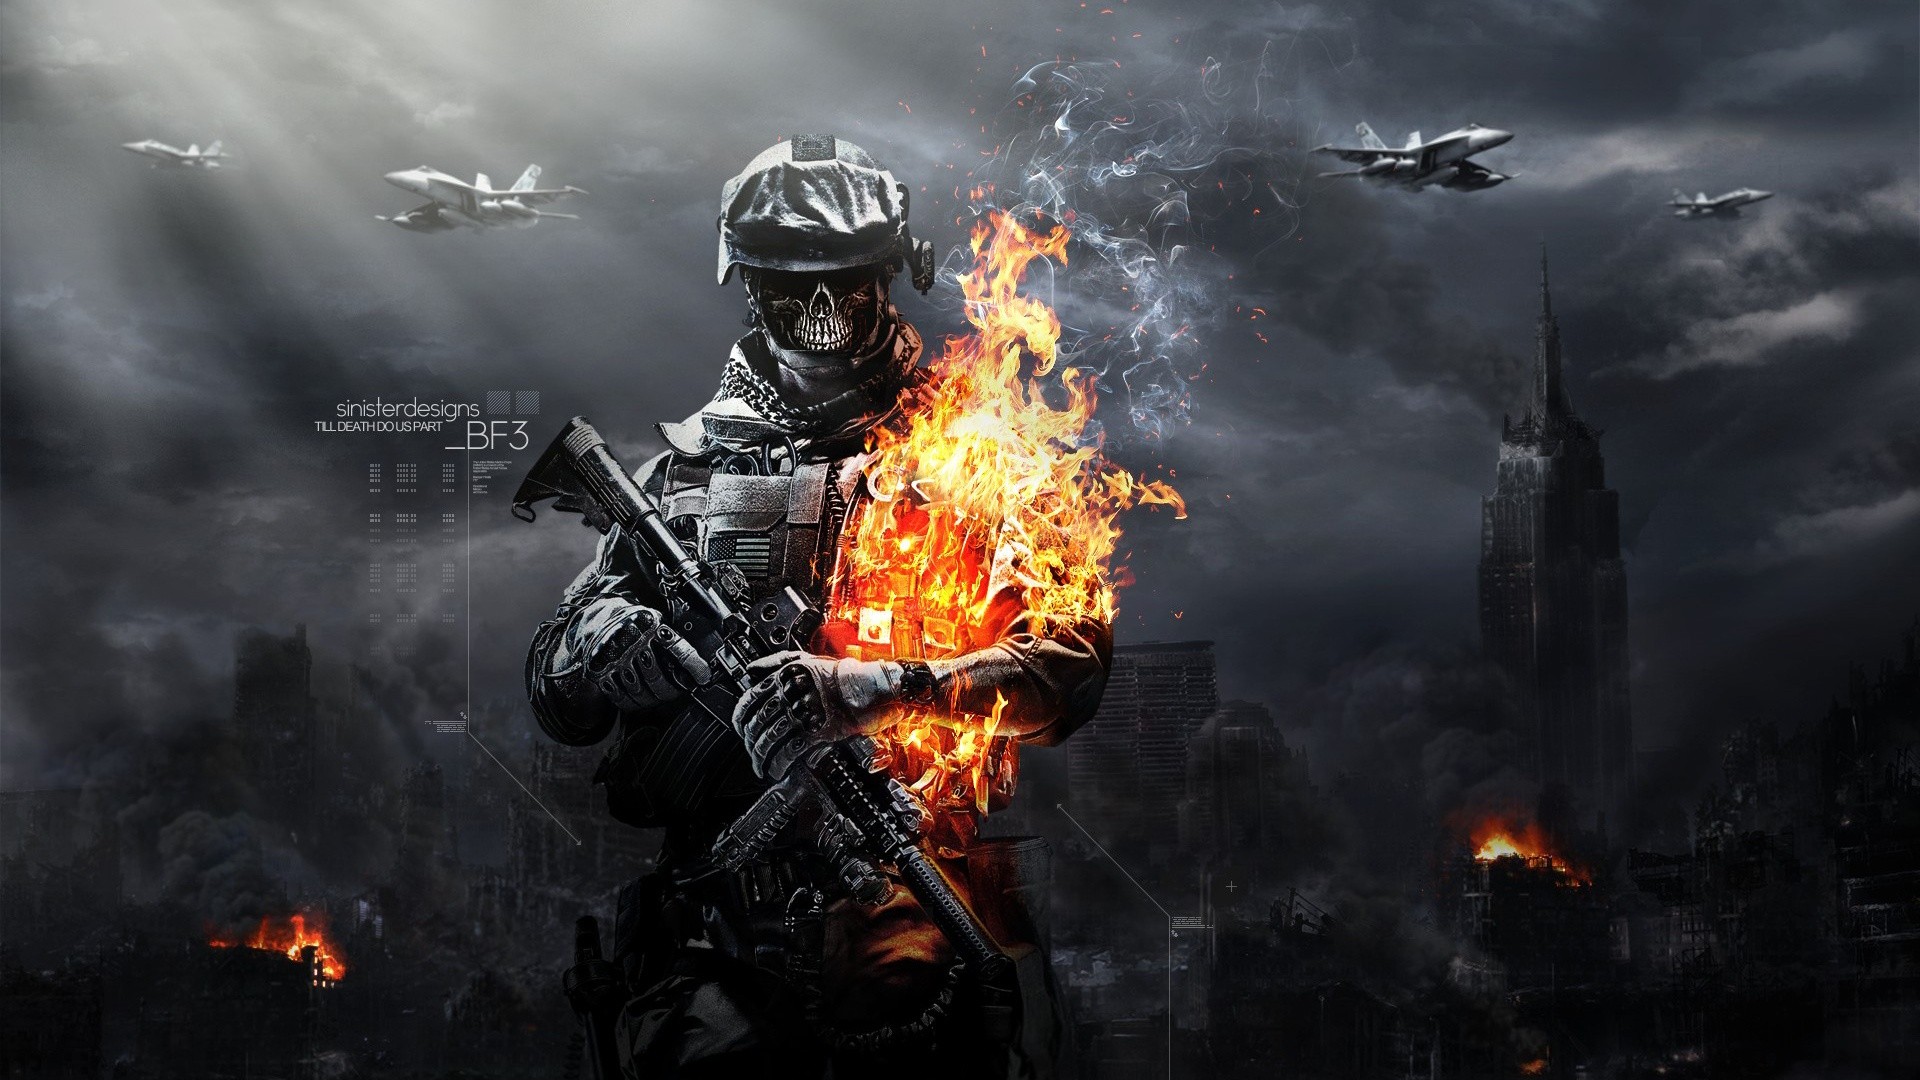 General 1920x1080 Battlefield 3 video games skull fire video game art PC gaming EA Games weapon Electronic Arts